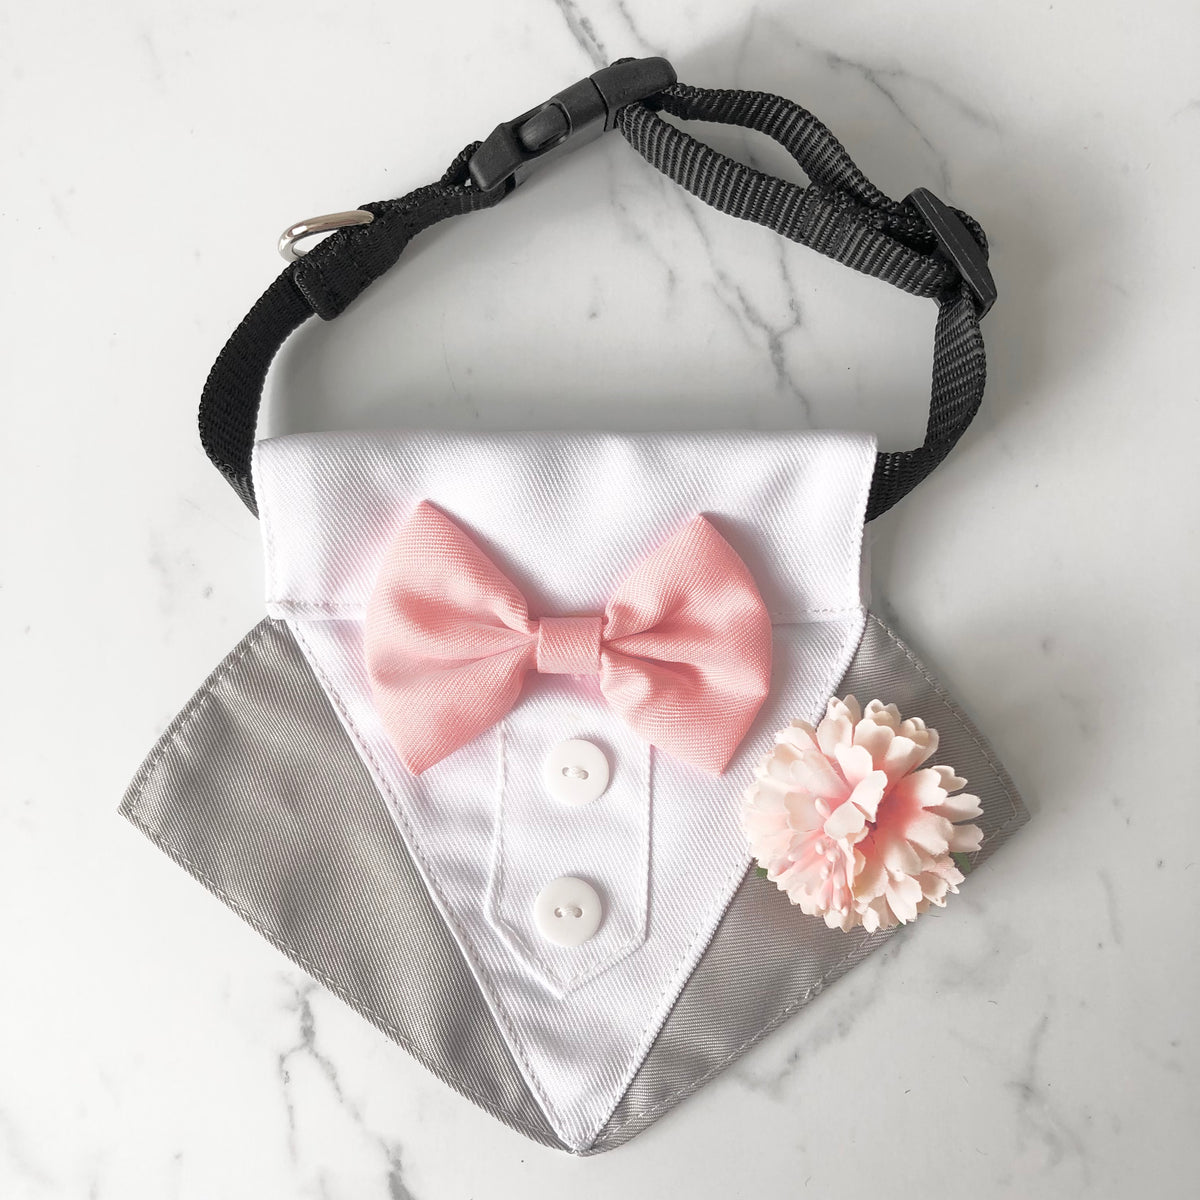 Dog Tuxedo Bandana with Flower Boutonniere and Bow Tie - Grey